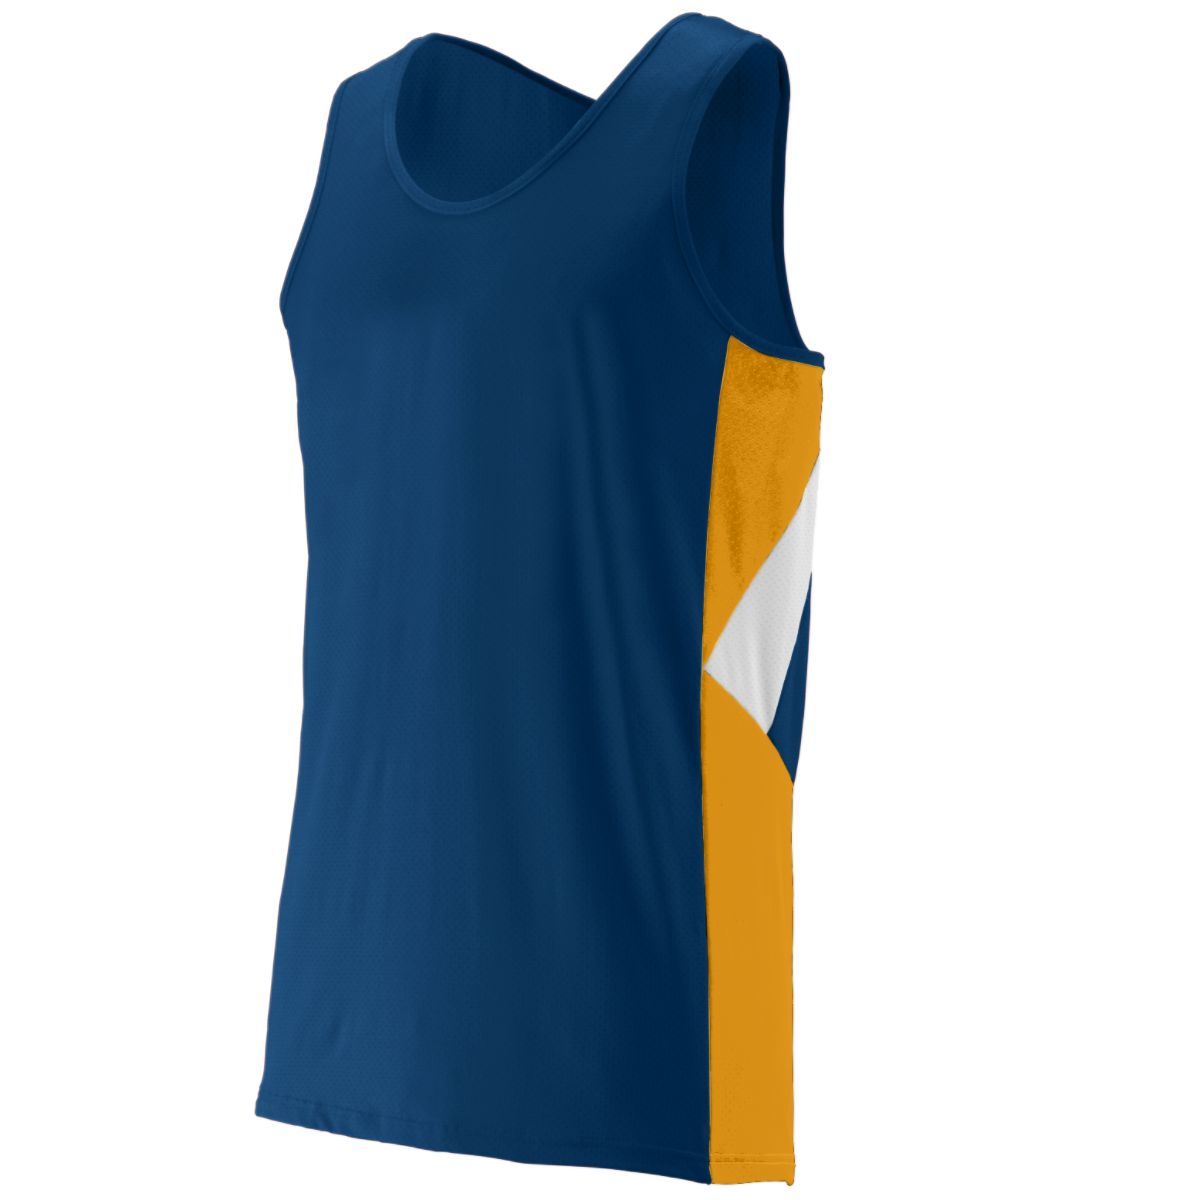 Augusta Sportswear Sprint Jersey in Navy/Gold/White  -Part of the Adult, Adult-Jersey, Augusta-Products, Track-Field, Shirts product lines at KanaleyCreations.com